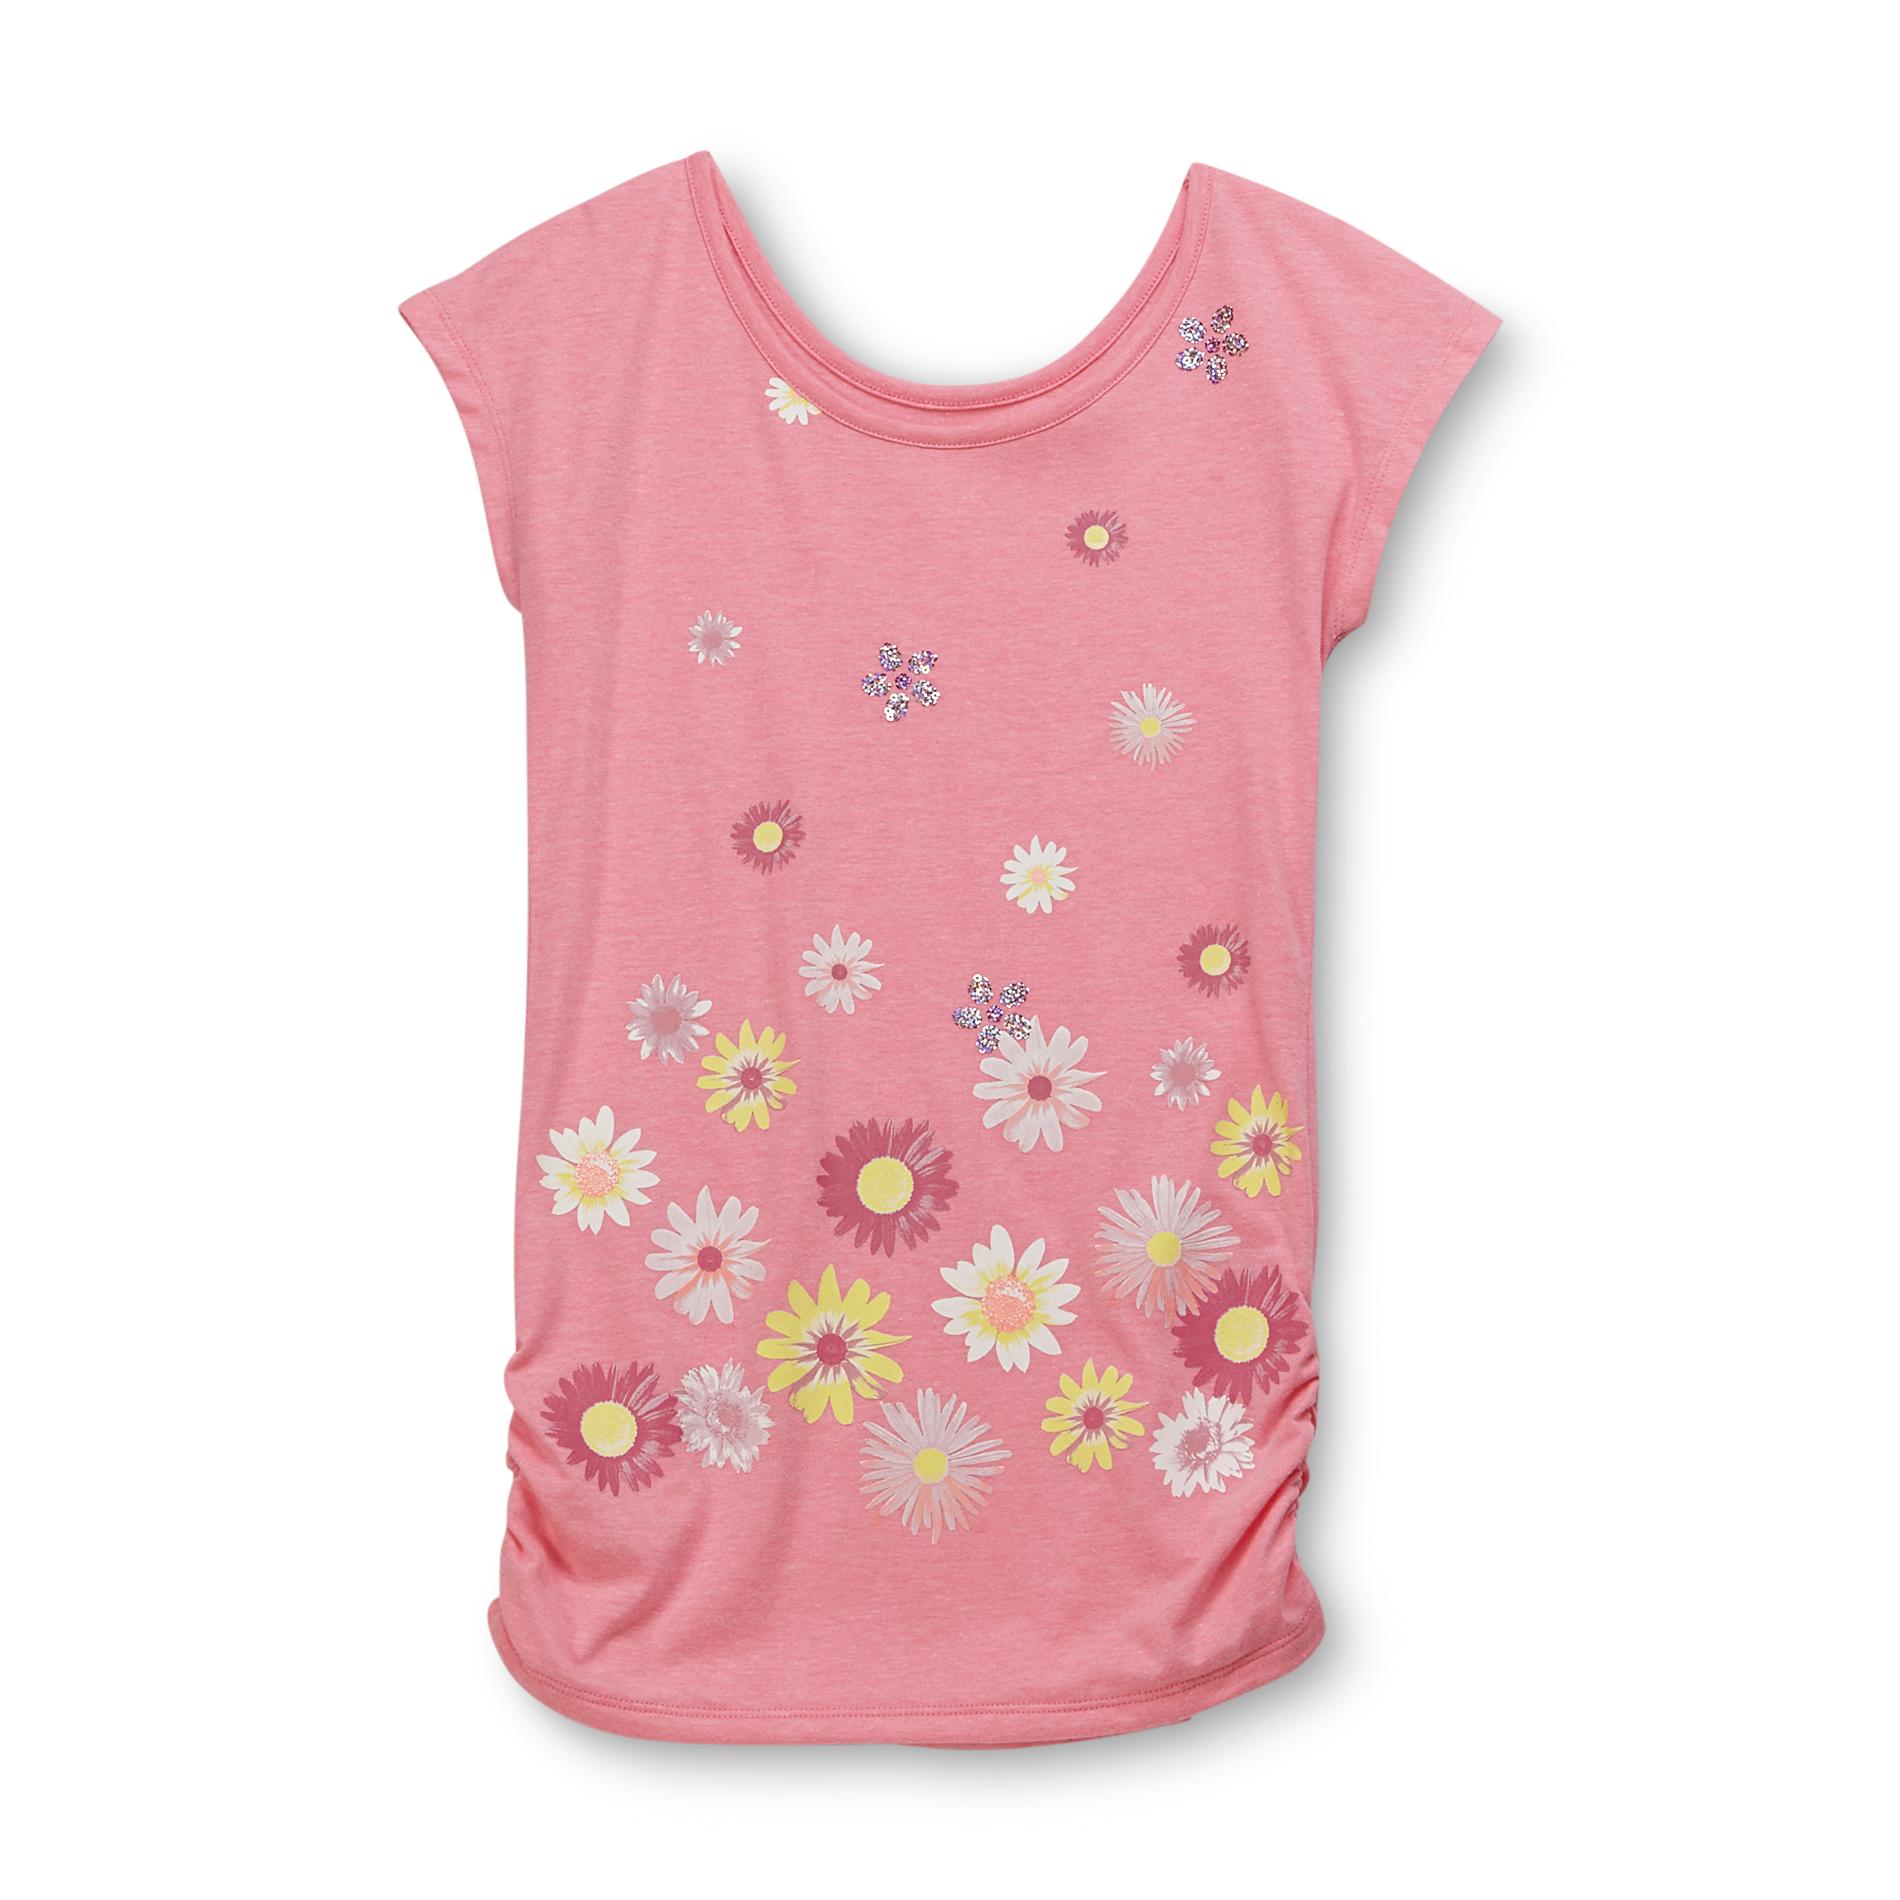 Basic Editions Girl's Graphic Tunic Top - Floral